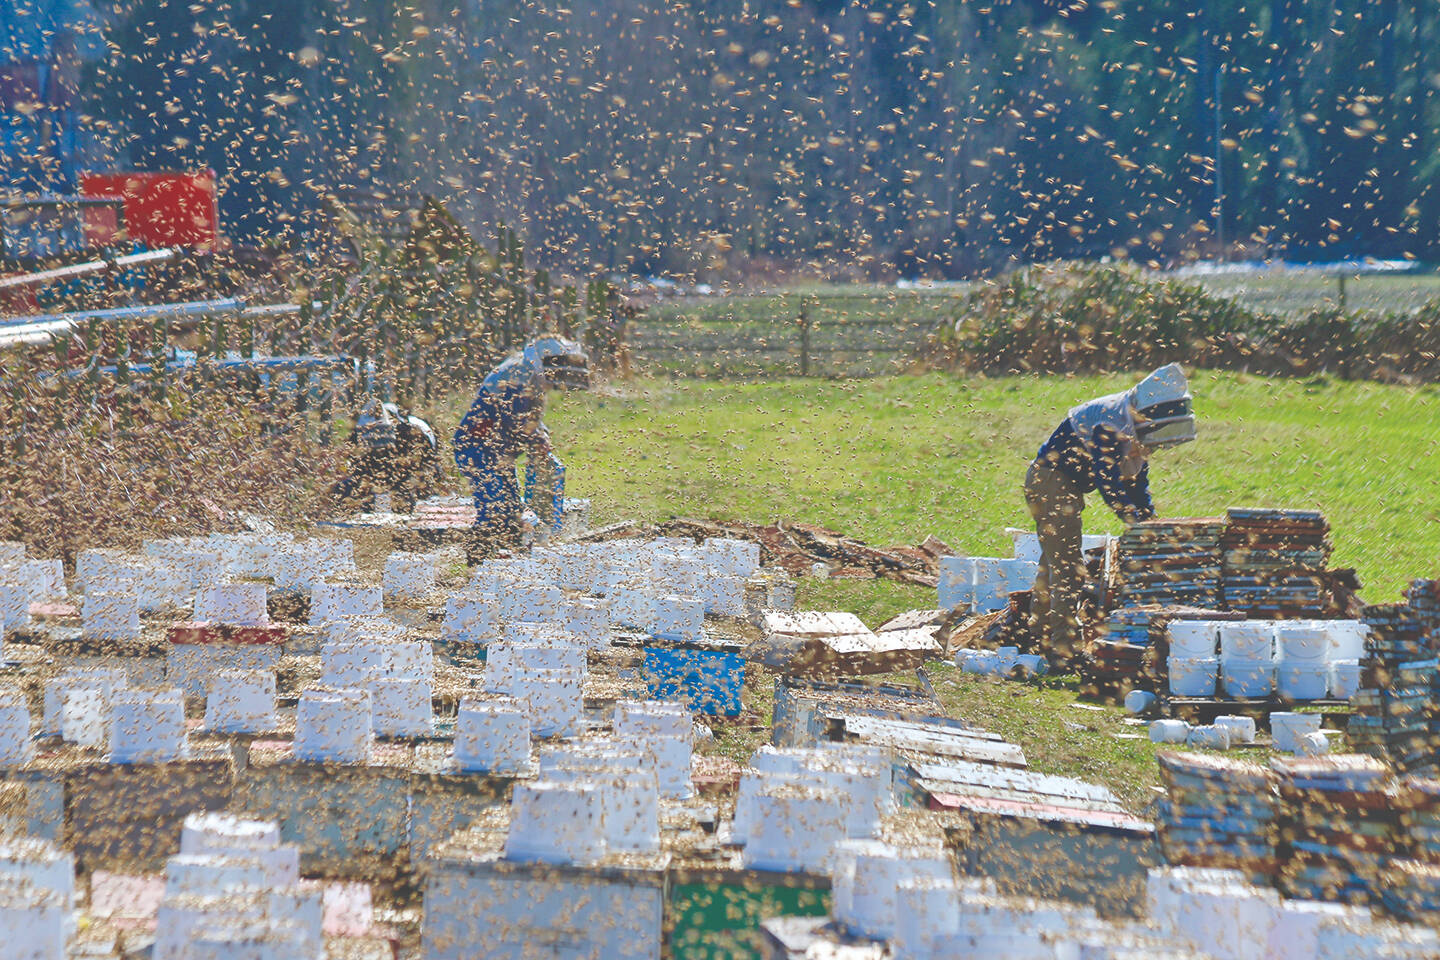 Beekeepers move approximately 3.5 million bees from travelling frames into hives at a farm on North Oyster’s Code Road on March 8. (Duck Paterson photo)